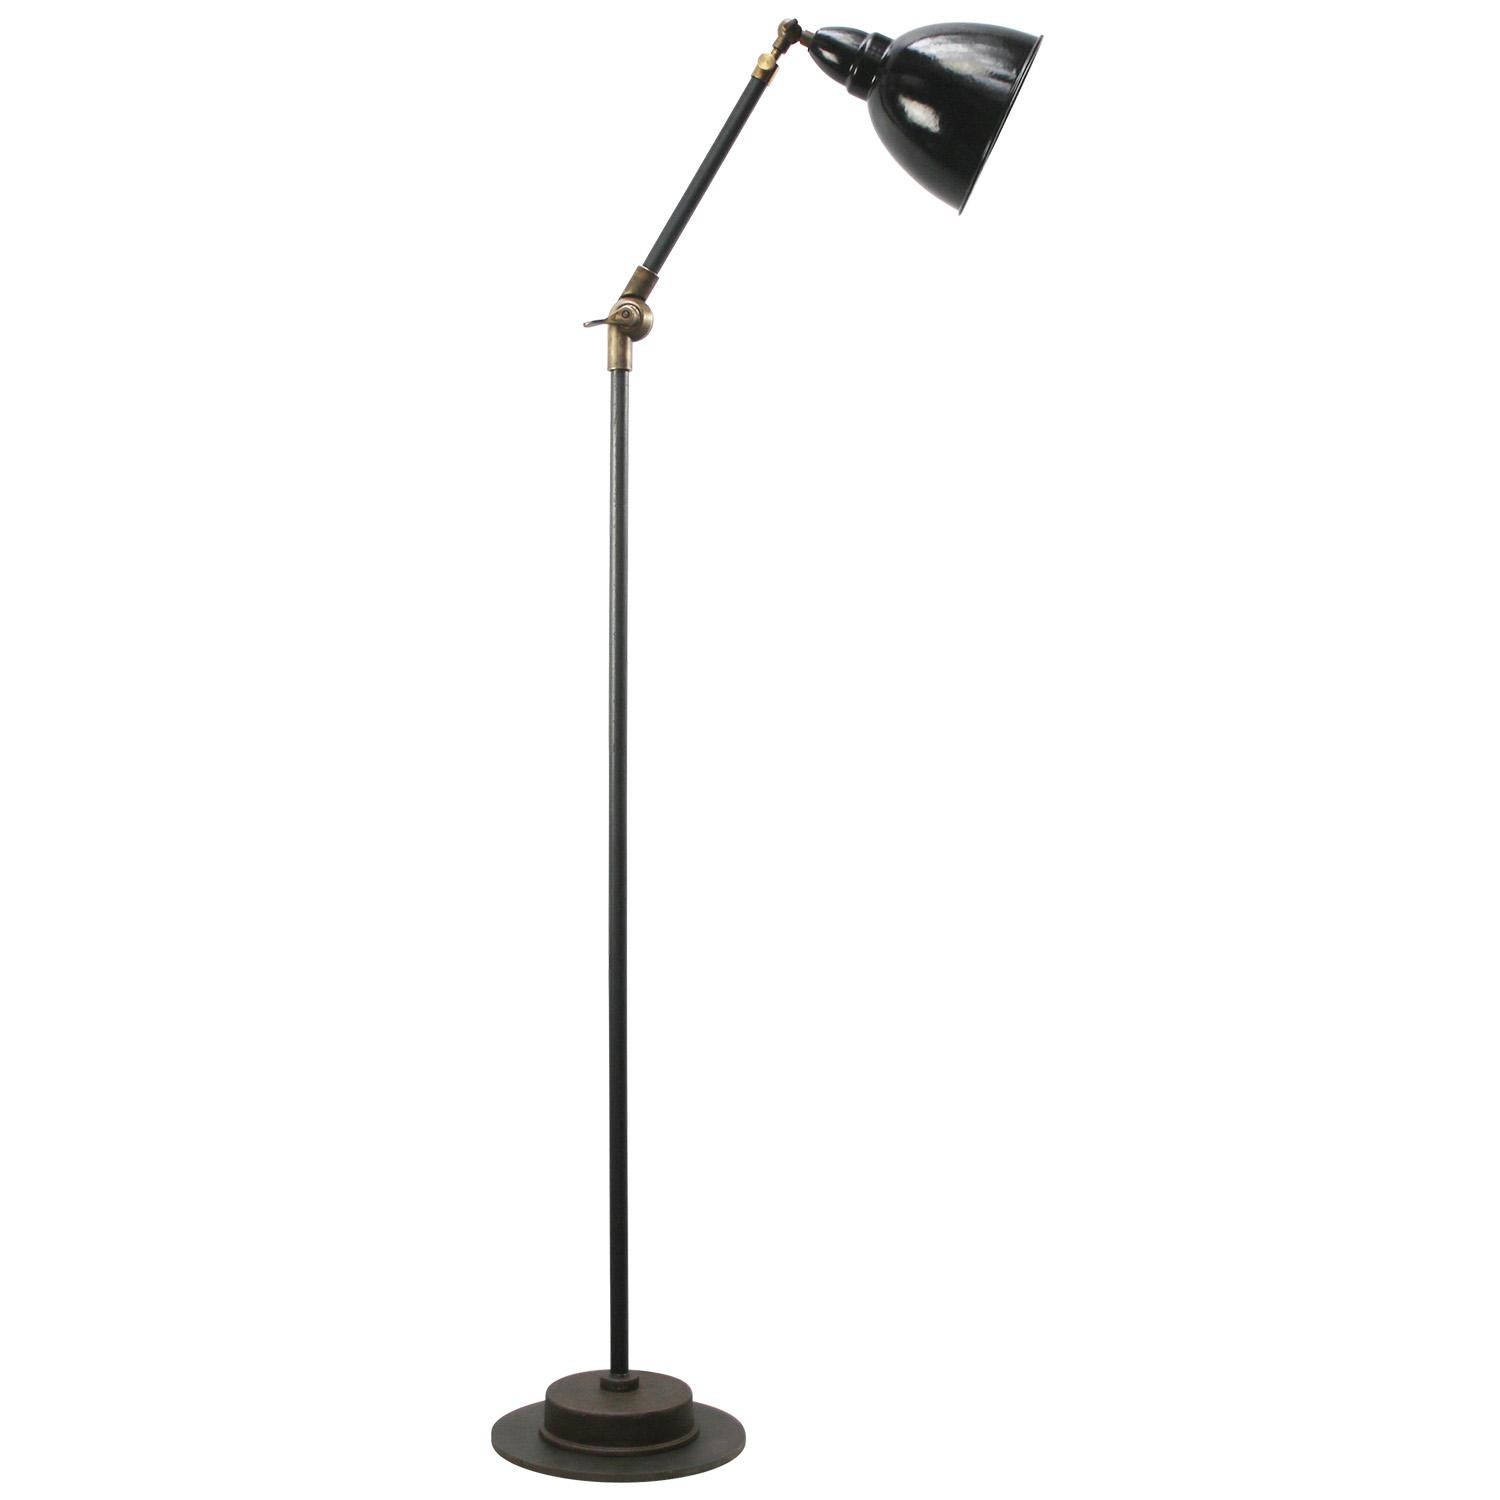 Black Enamel Vintage industrial workshop floor lamp
Cast iron with brass joints
Adjustable in angle.

Diameter foot 23 cm

Electric wire 2 meter / 80” with plug and floor switch

Available with UK / US plug

Priced per individual item. All lamps